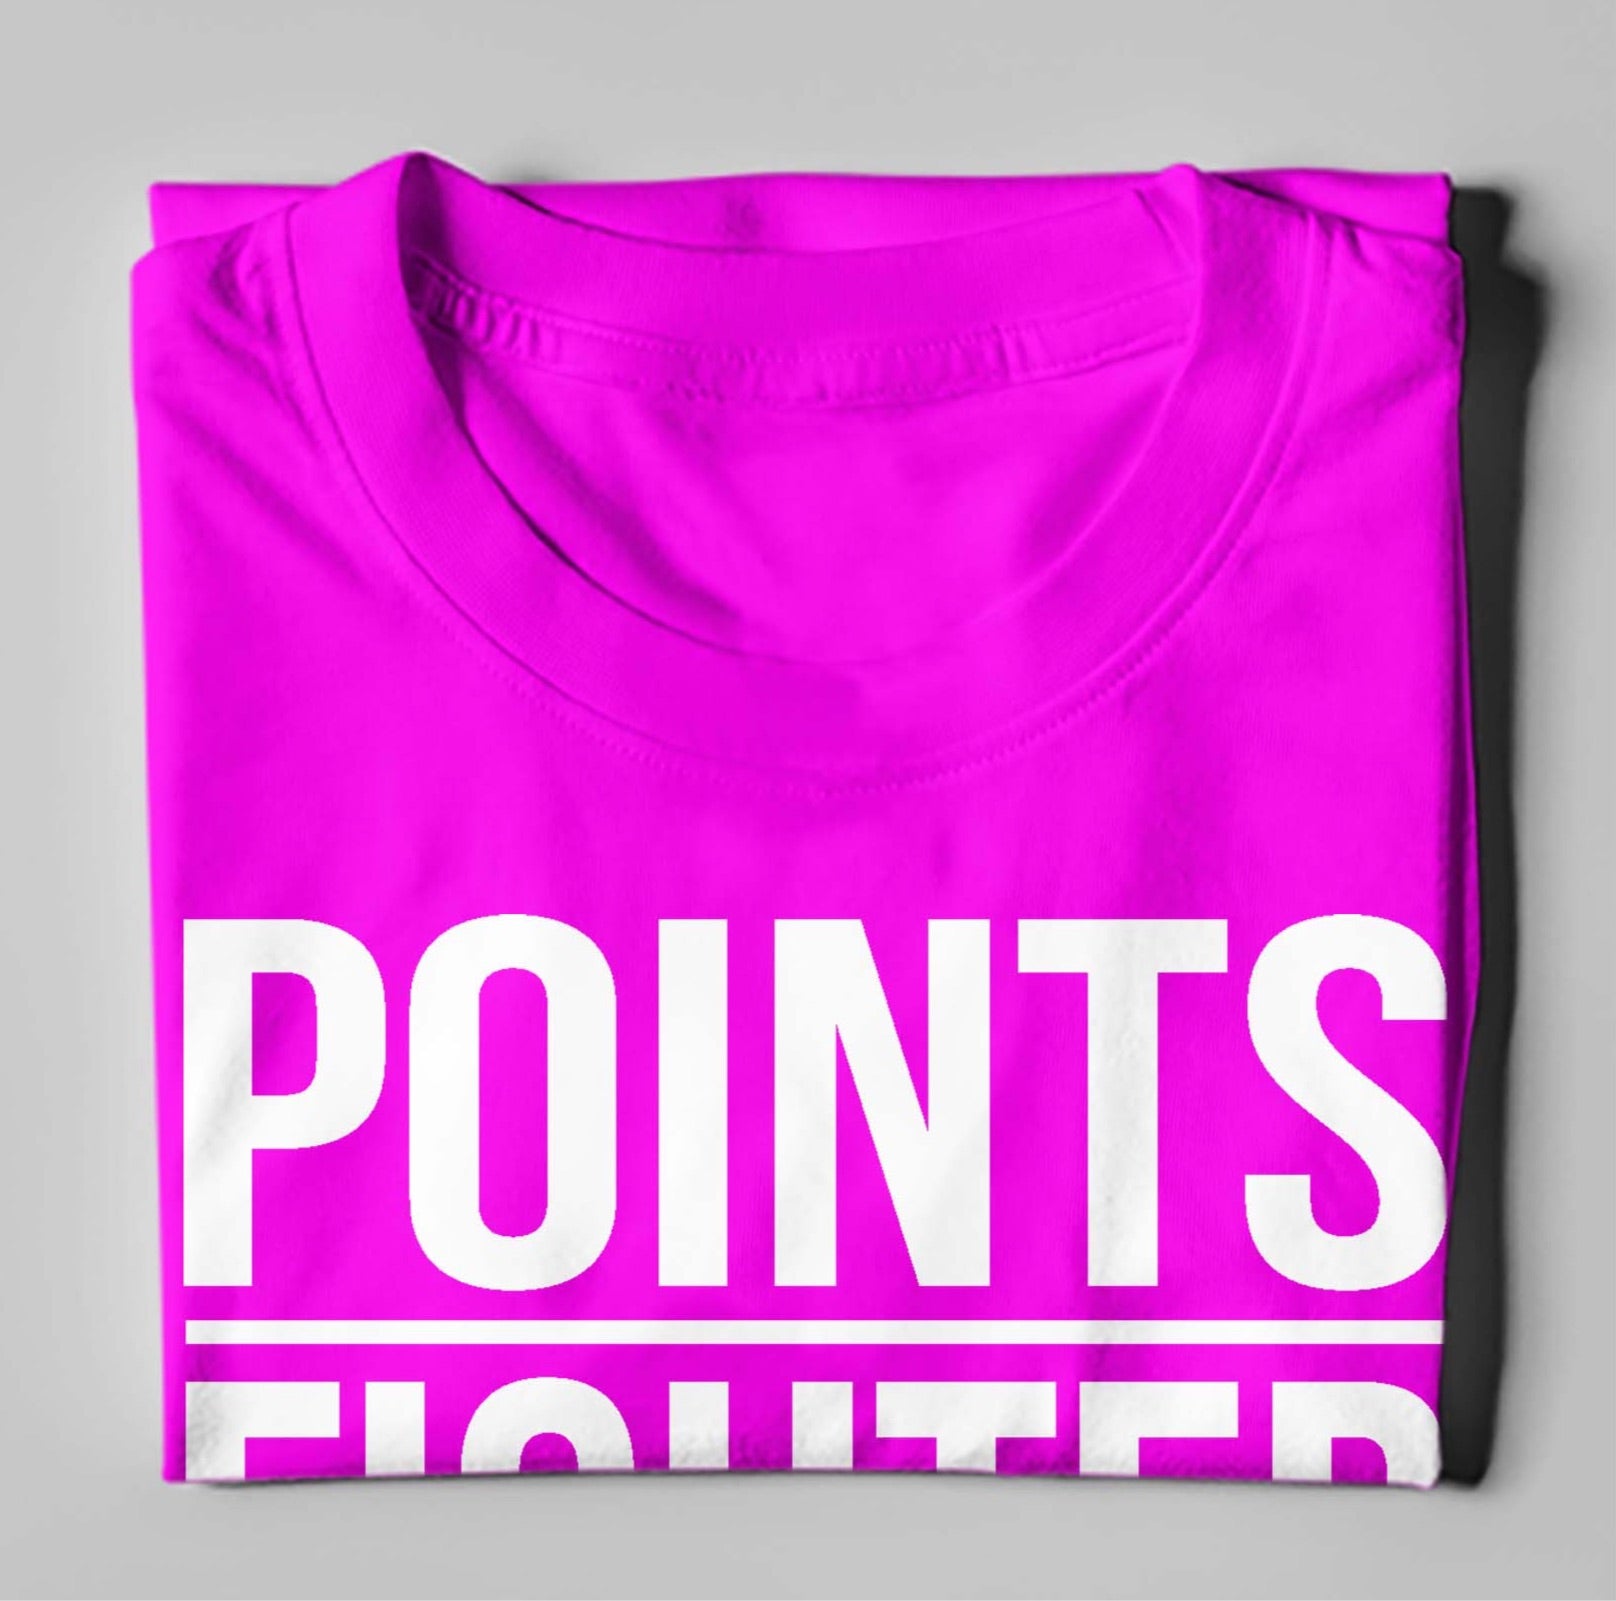 Points Fighter T-Shirt - Pink